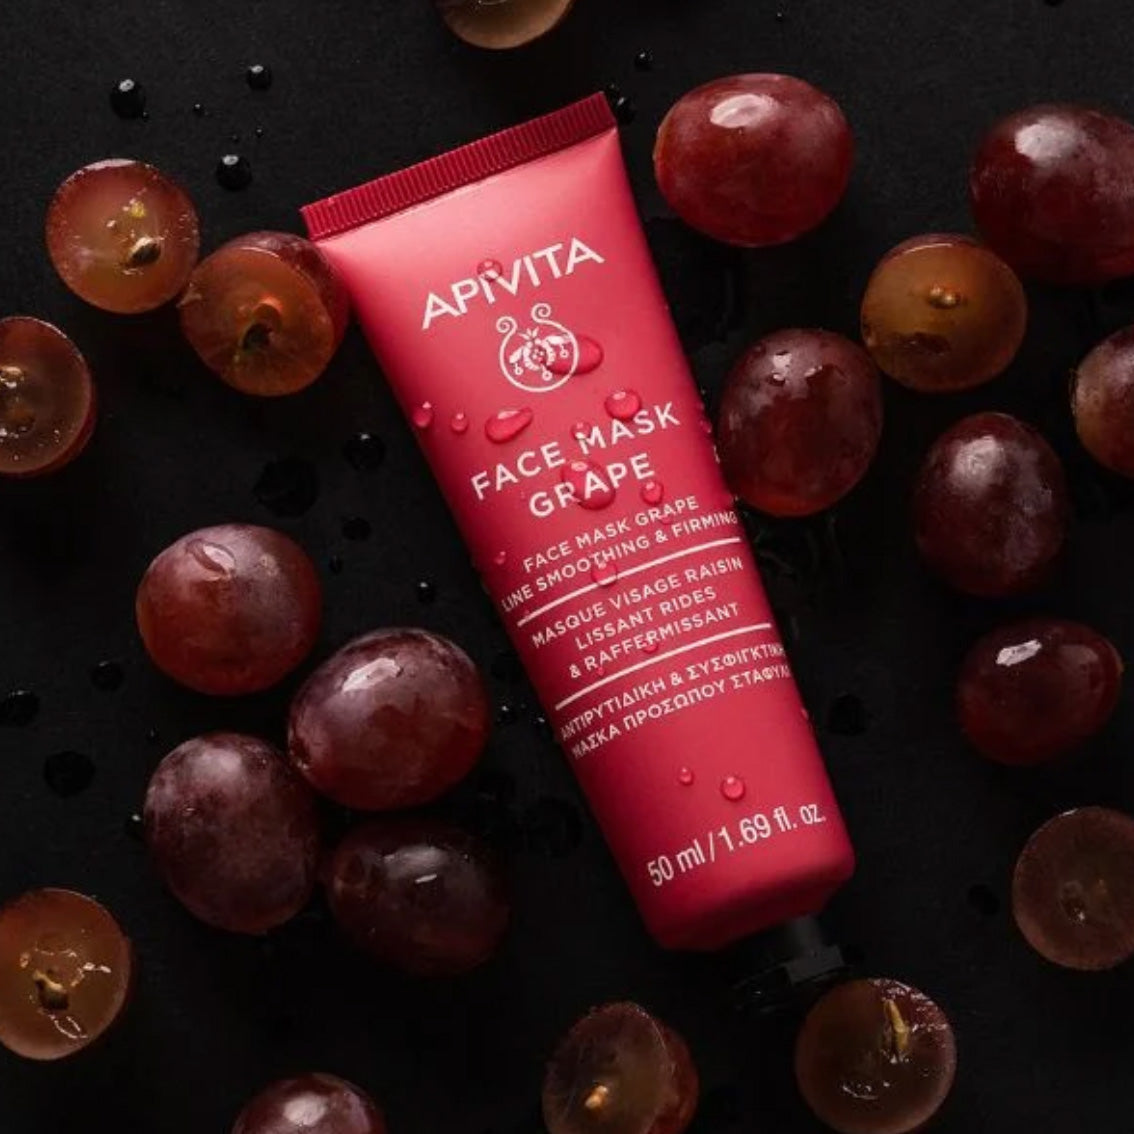 Apivita Face Mask Grape Line Smoothing & Firming with 94% natural ingredients formula reduce the appearance of fine lines, improve skin elasticity, and revitalise mature skin.